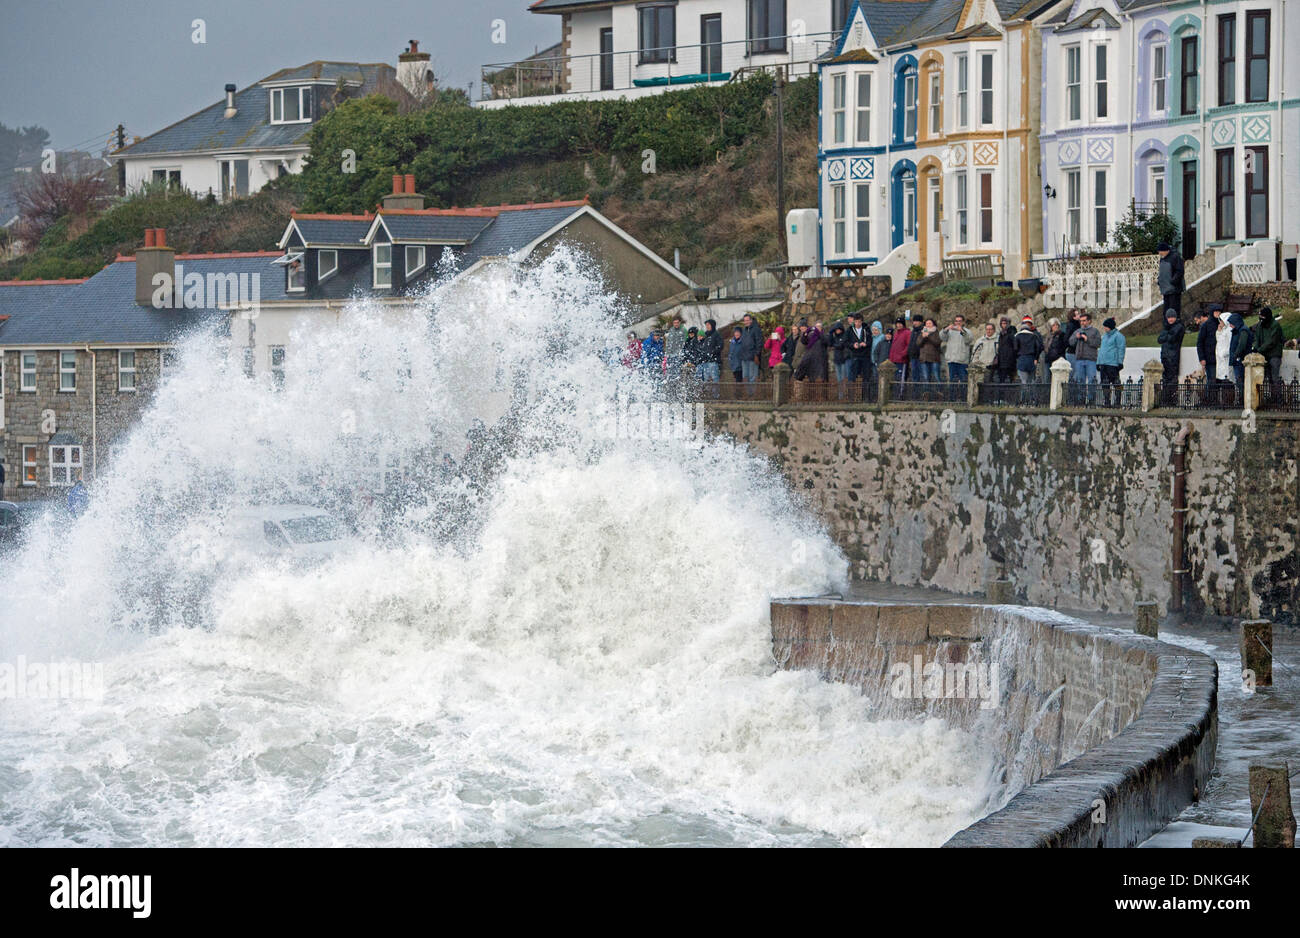 Huge storm waves pound Porthleven Harbour as many storm watchers witness the spectacle Stock Photo